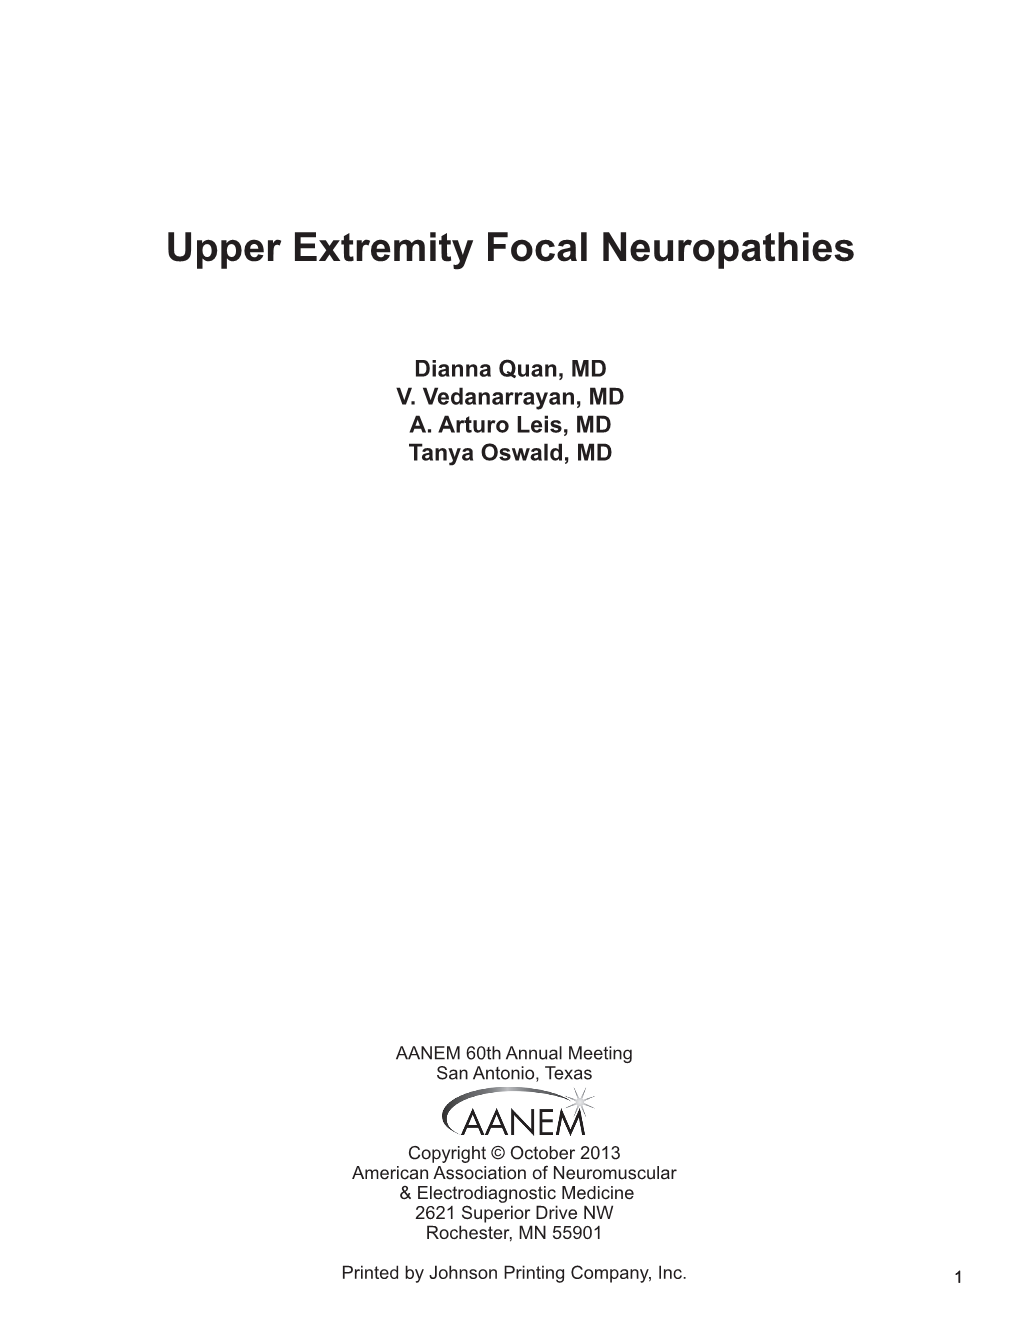 Upper Extremity Focal Neuropathies